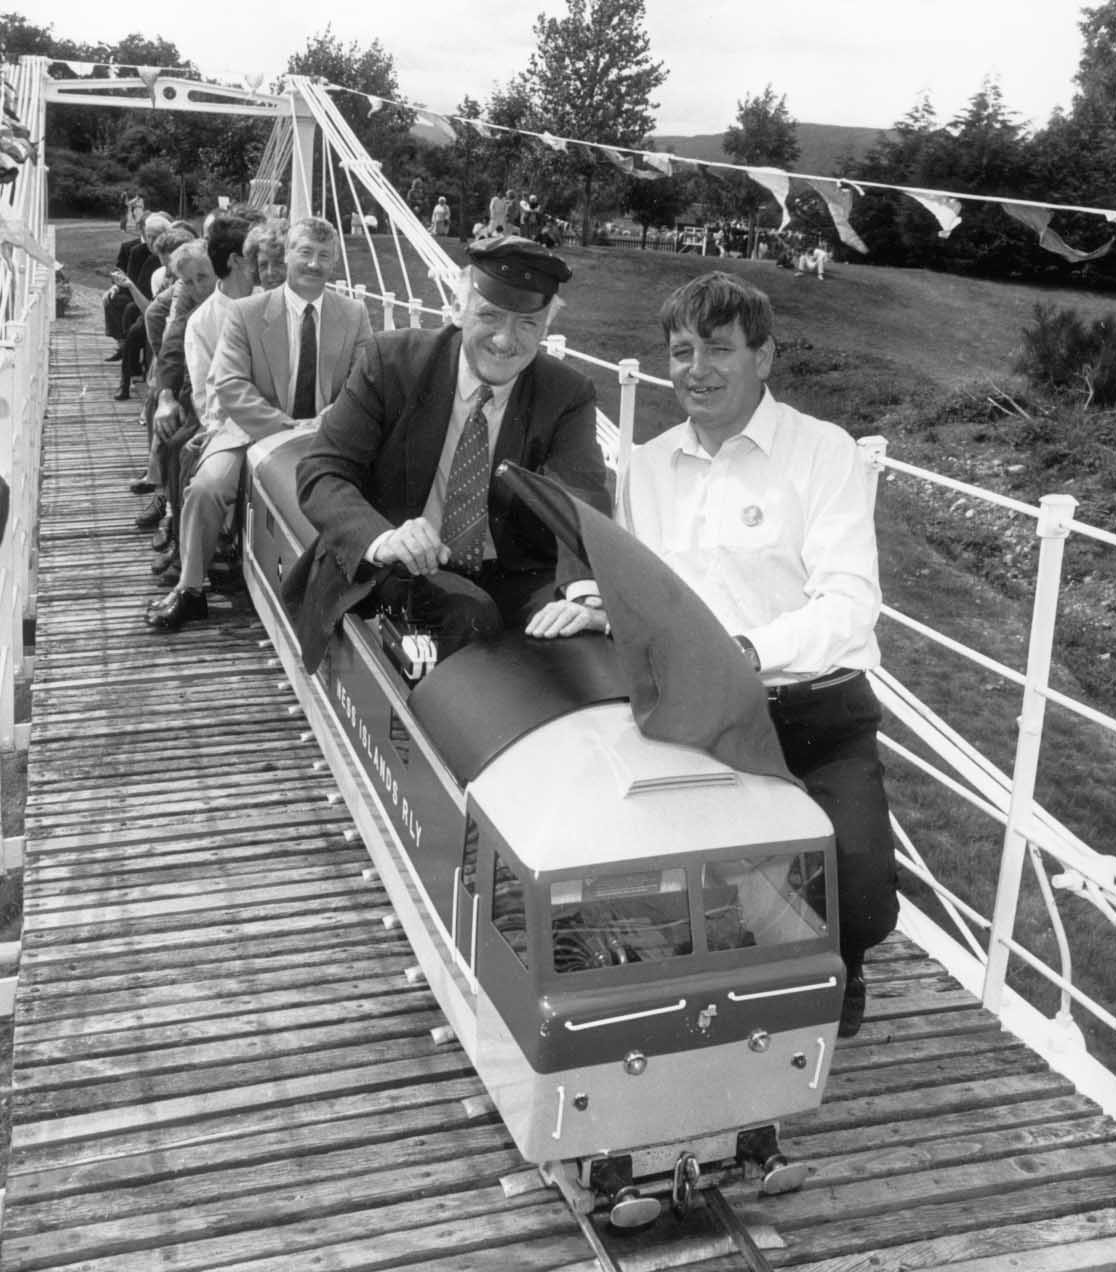 In the driver's seat yesterday at the Ness miniature railway at Whin Park, Inverness, is the late Sir Russell Johnston, MP for Inverness, Nairn and Lochaber between 1983 and 1997, as he is flagged off by Ian Young at the official opening of the Ness railway bridge in August 1989.